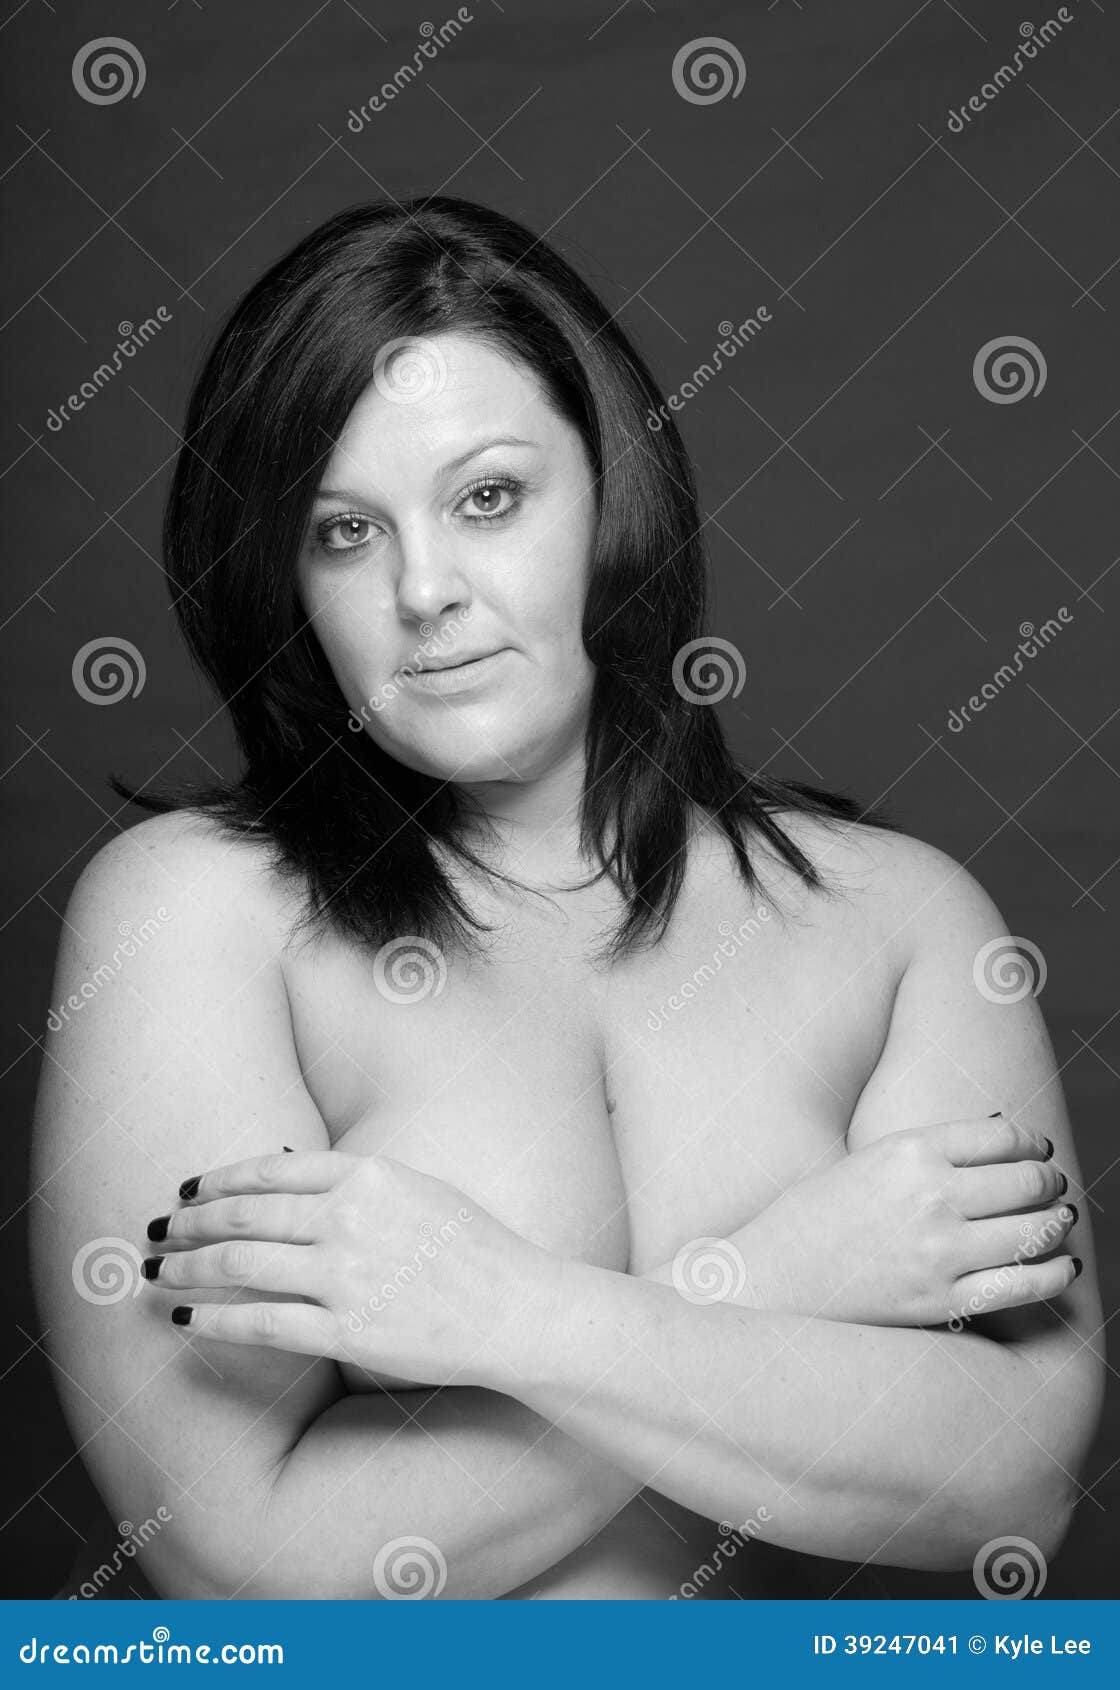 Nude Mature Plus Sized Woman Stock Image - Image of hair, bottomless:  39247041